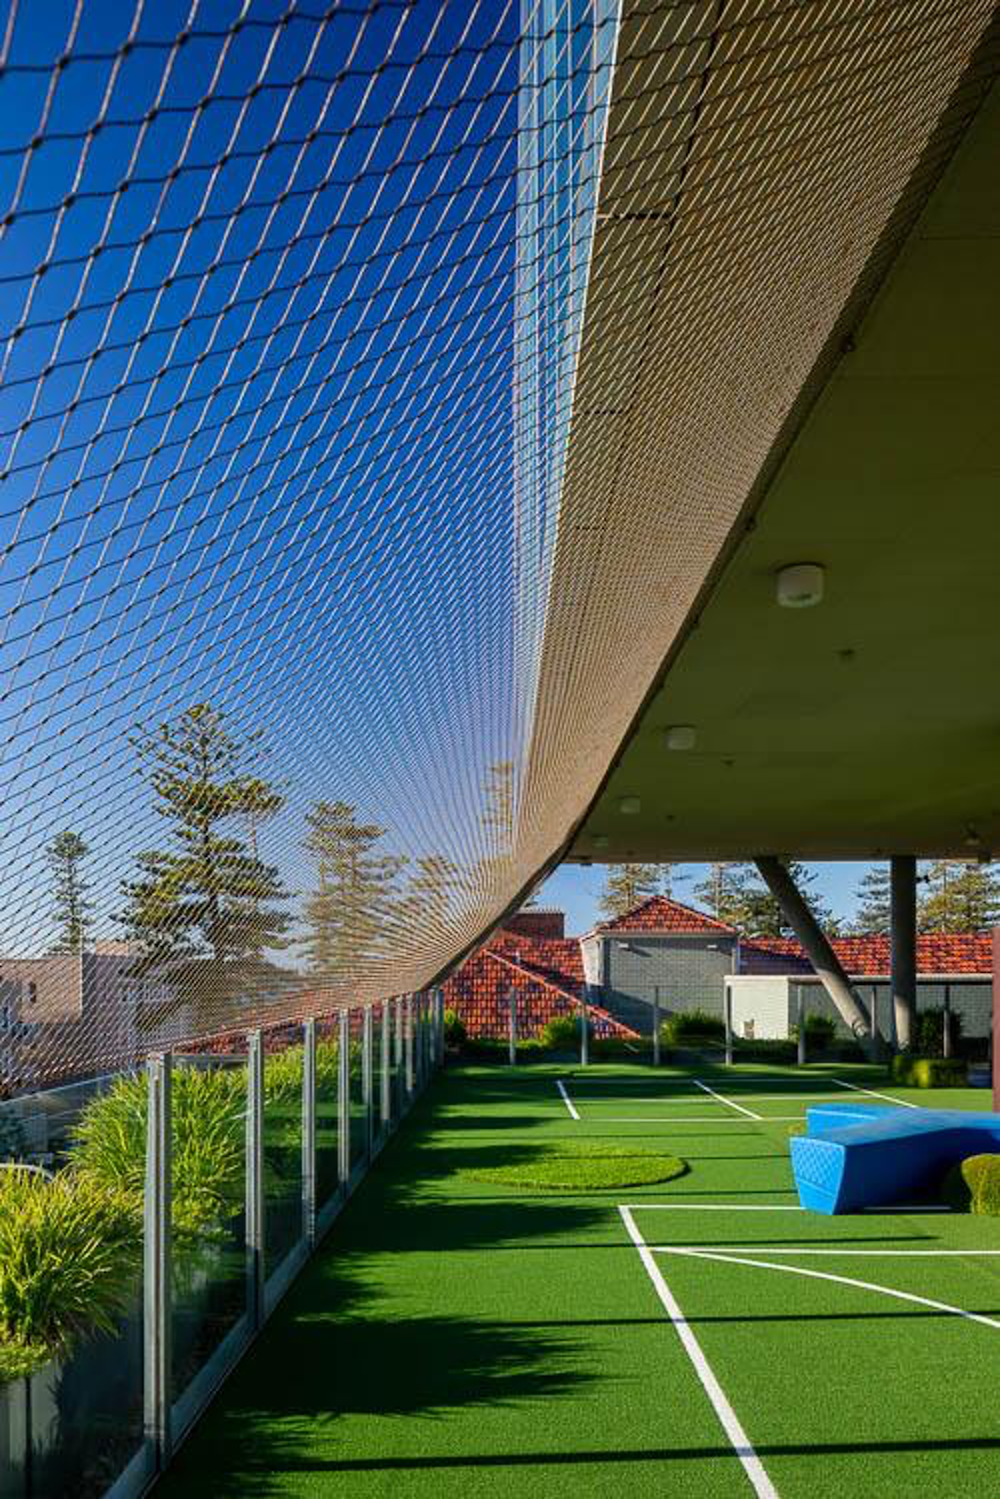 Uses of Webnet Stainless Steel Netting for Safety and Design / Tensile Design & Construct